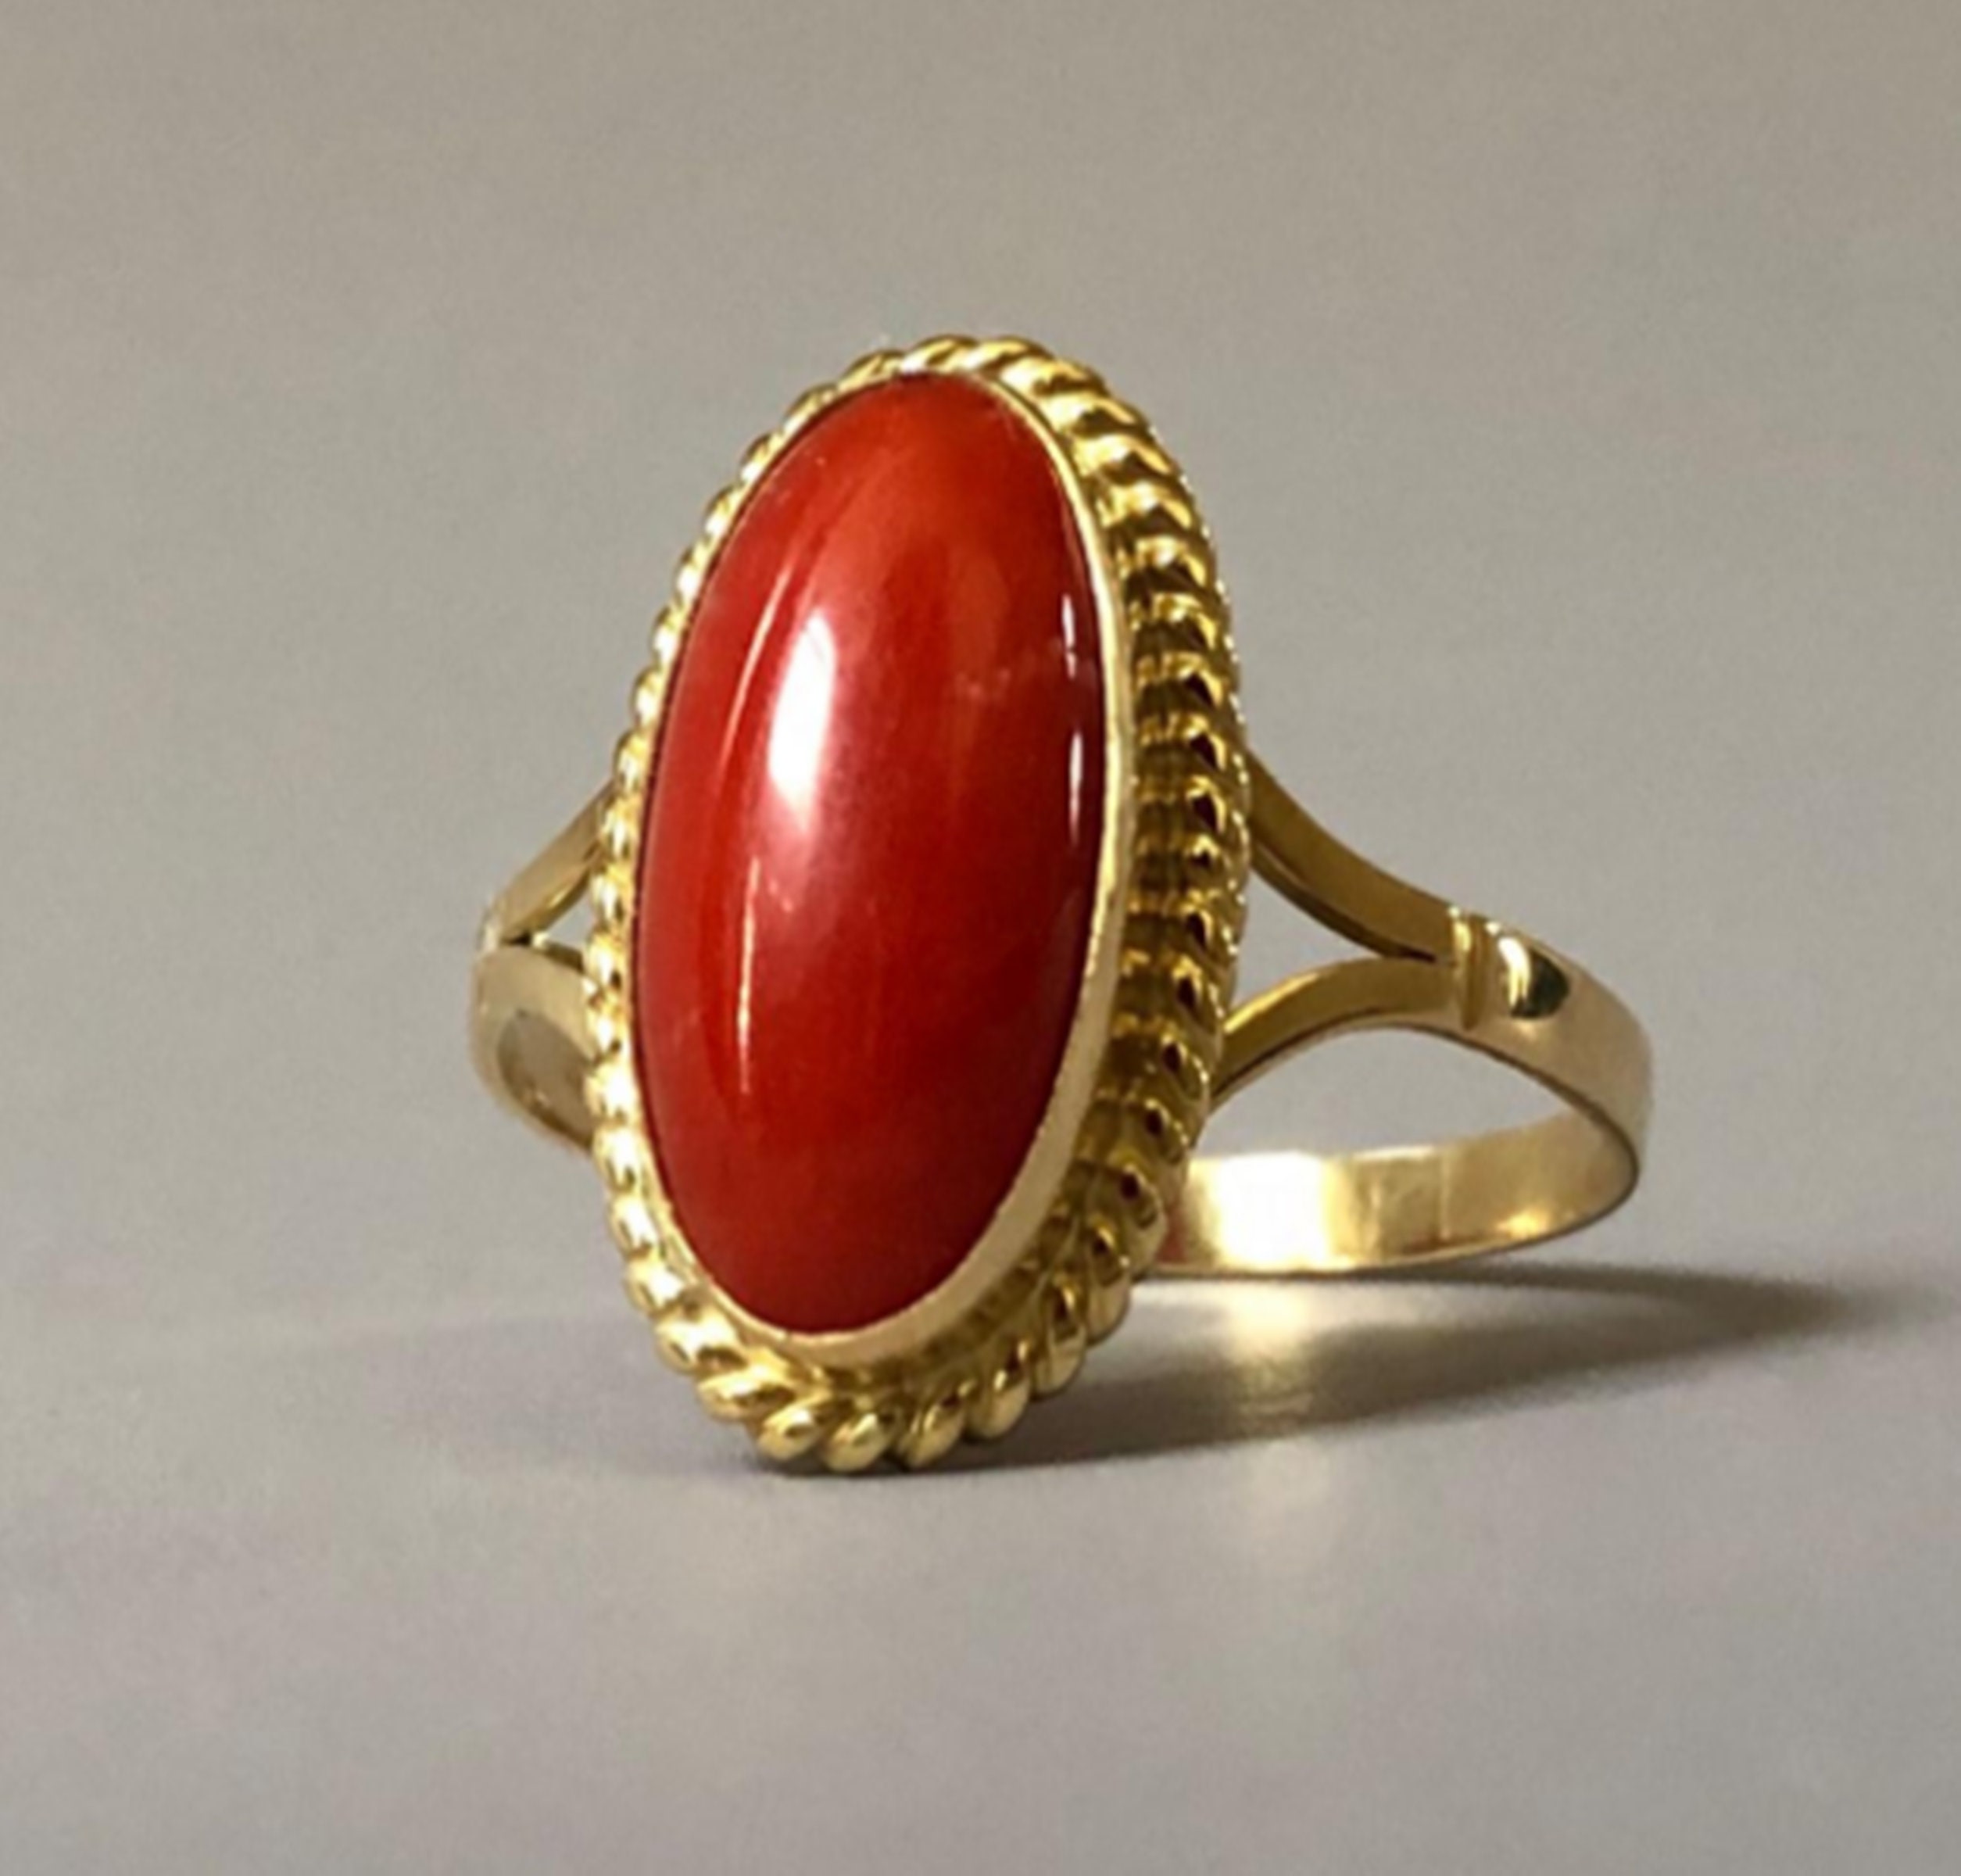 KJJEAXCMY boutique jewelry 925 sterling silver inlaid natural red coral ring  female models support testing - AliExpress